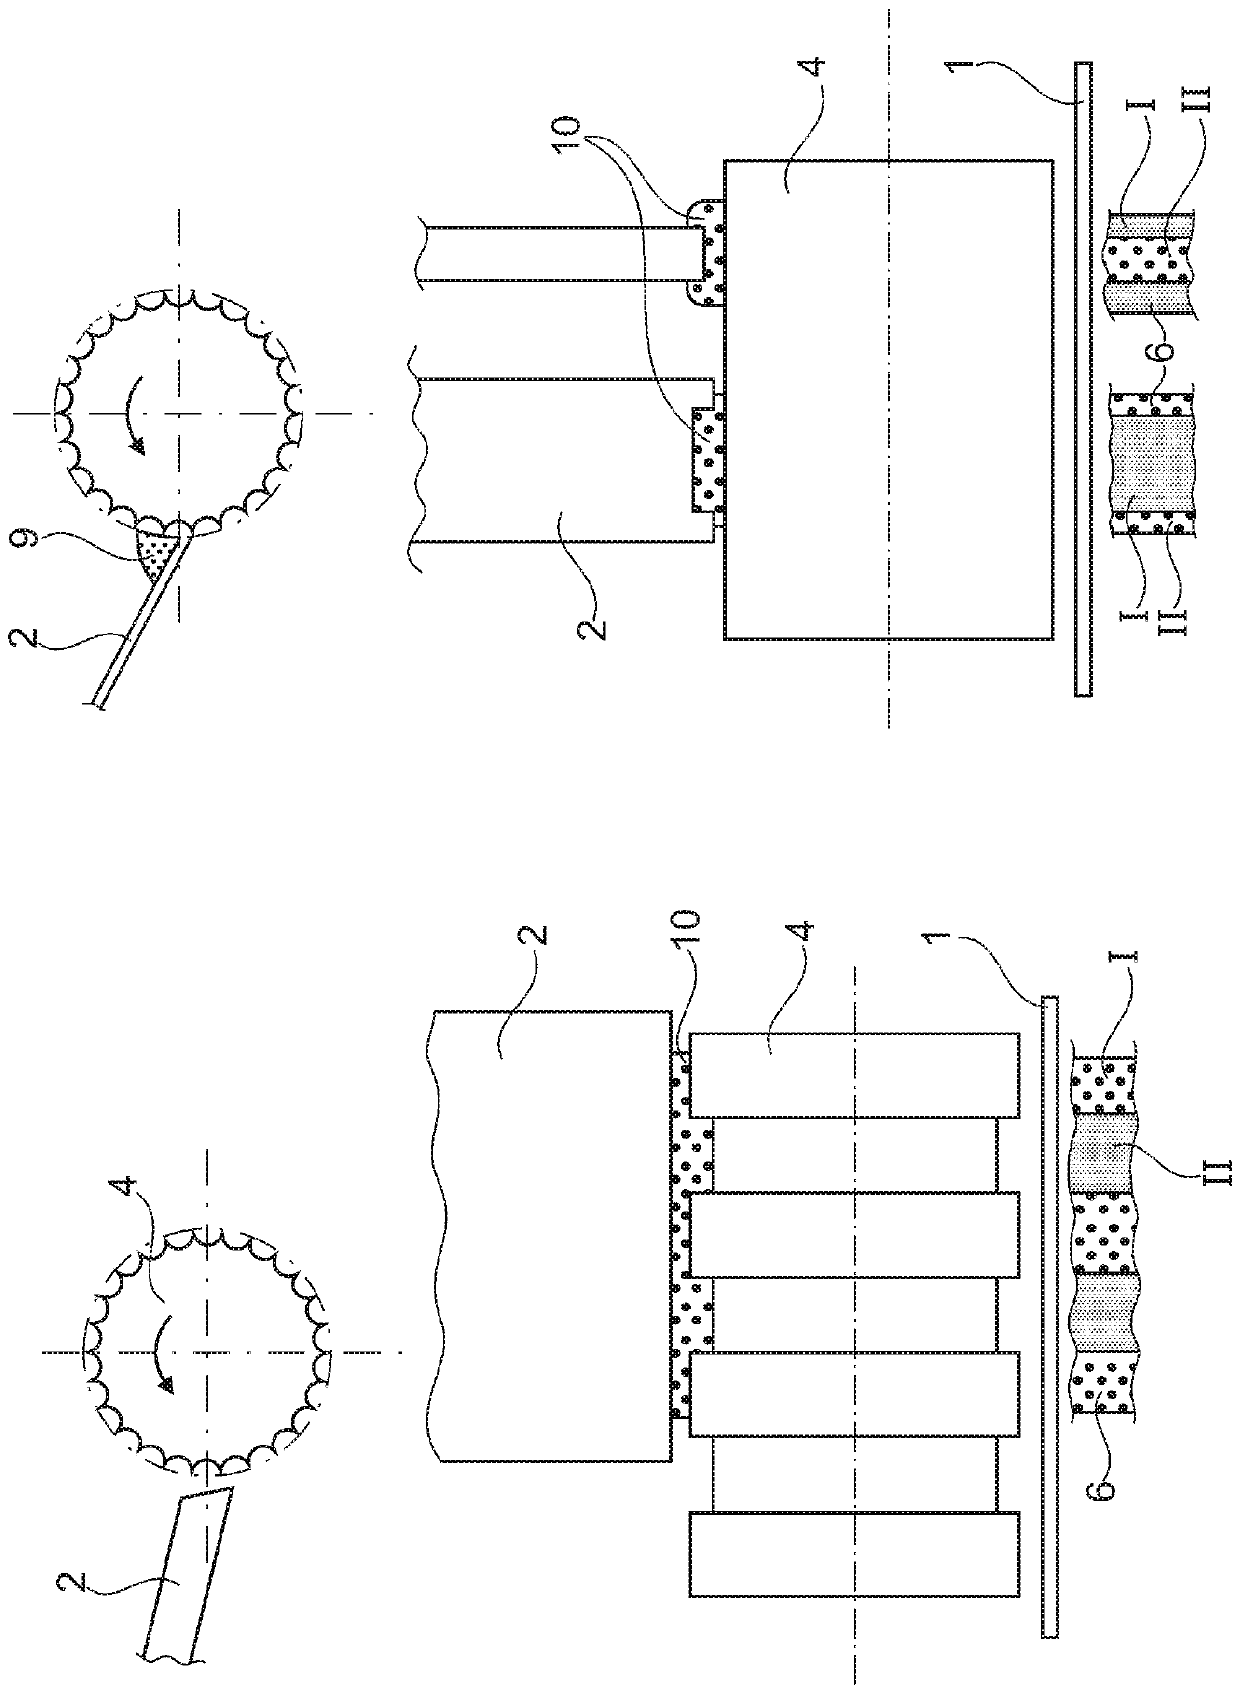 Apparatus for applying glue marks to wrapping strips of tobacco rod-shaped articles